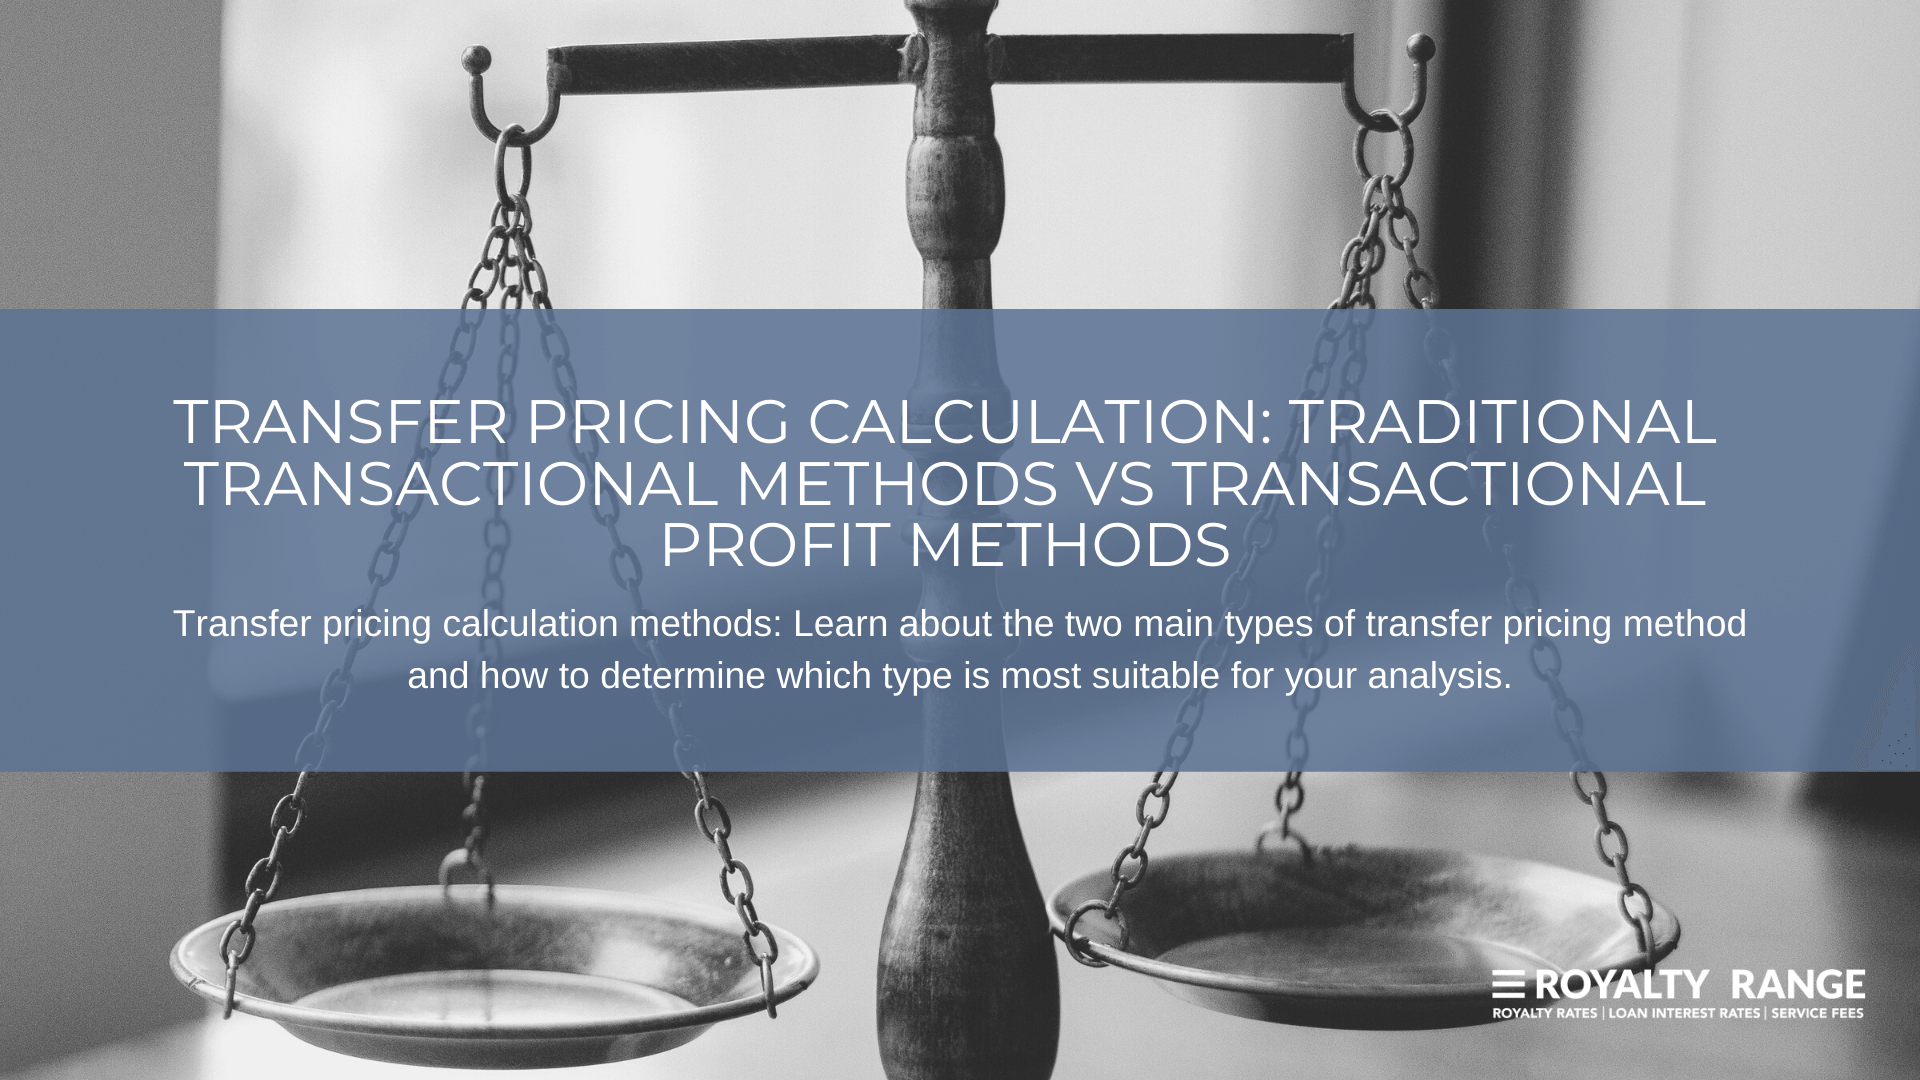 Transfer Pricing Calculation: Traditional transactional methods vs transactional profit methods